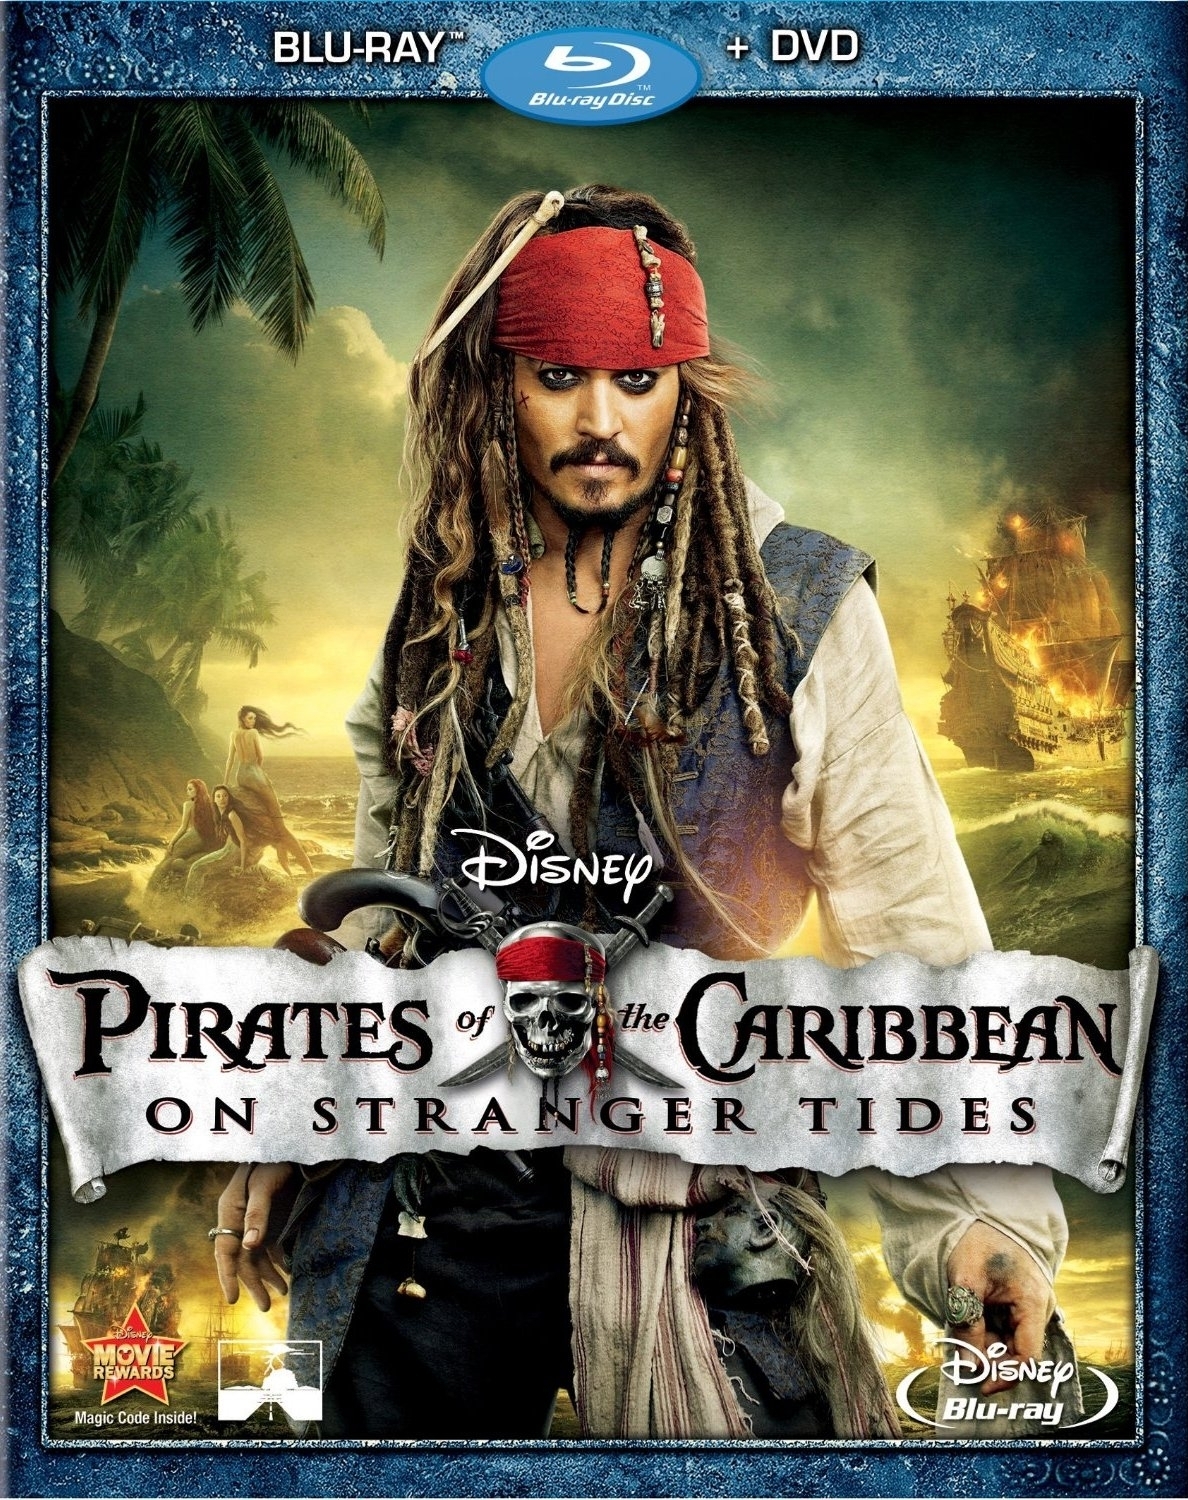 how to watch pirates of the caribbean 2 online free